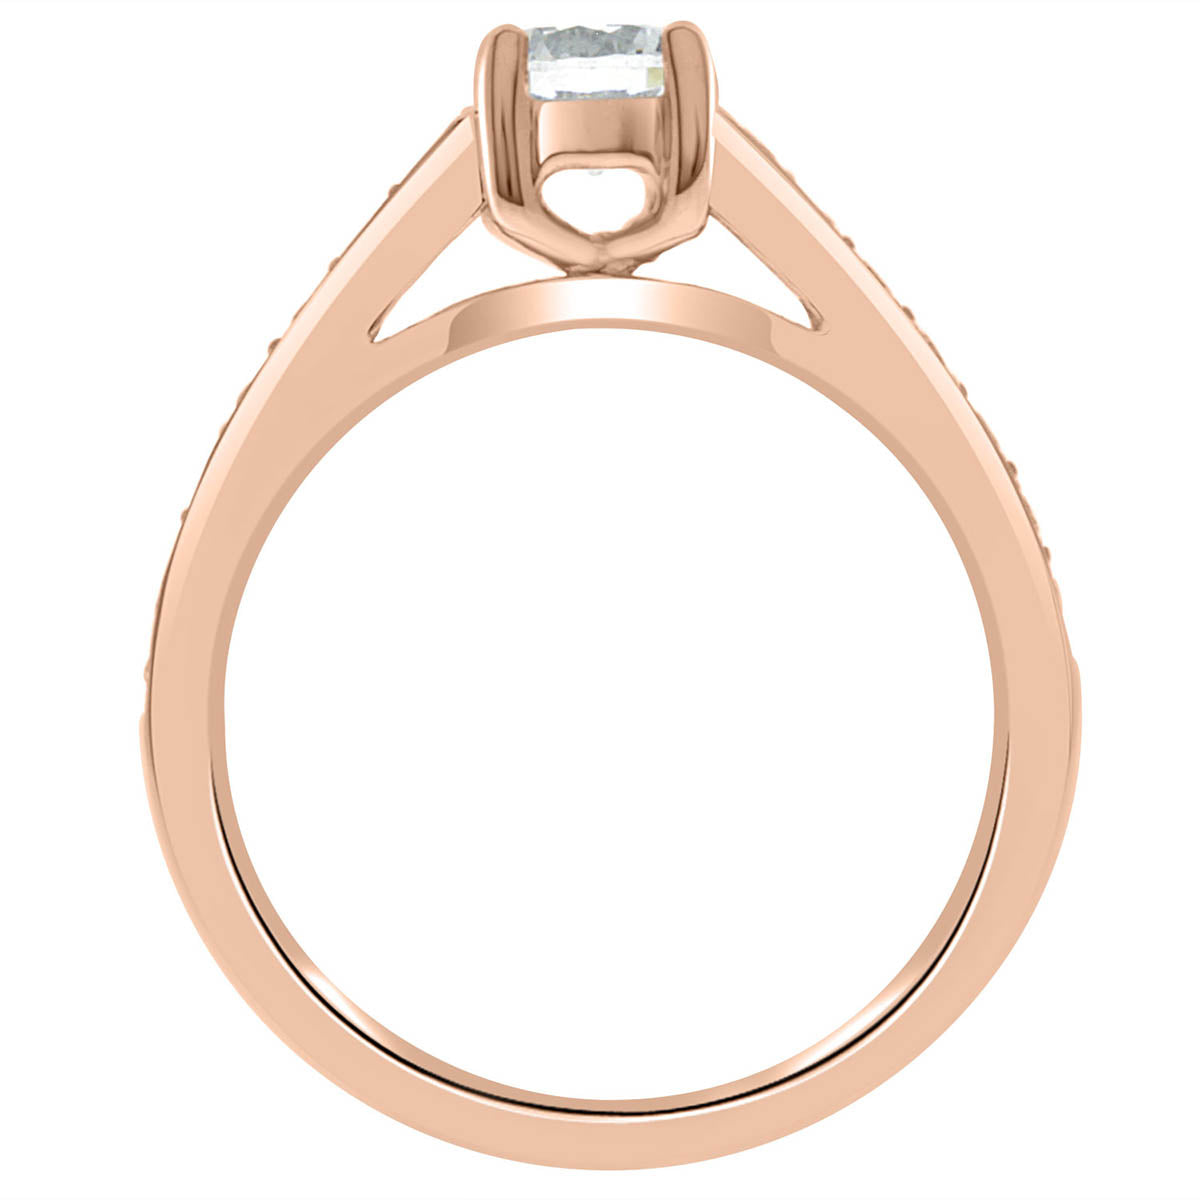 Pavé Diamond Ring manufactured in rose gold  standing upright